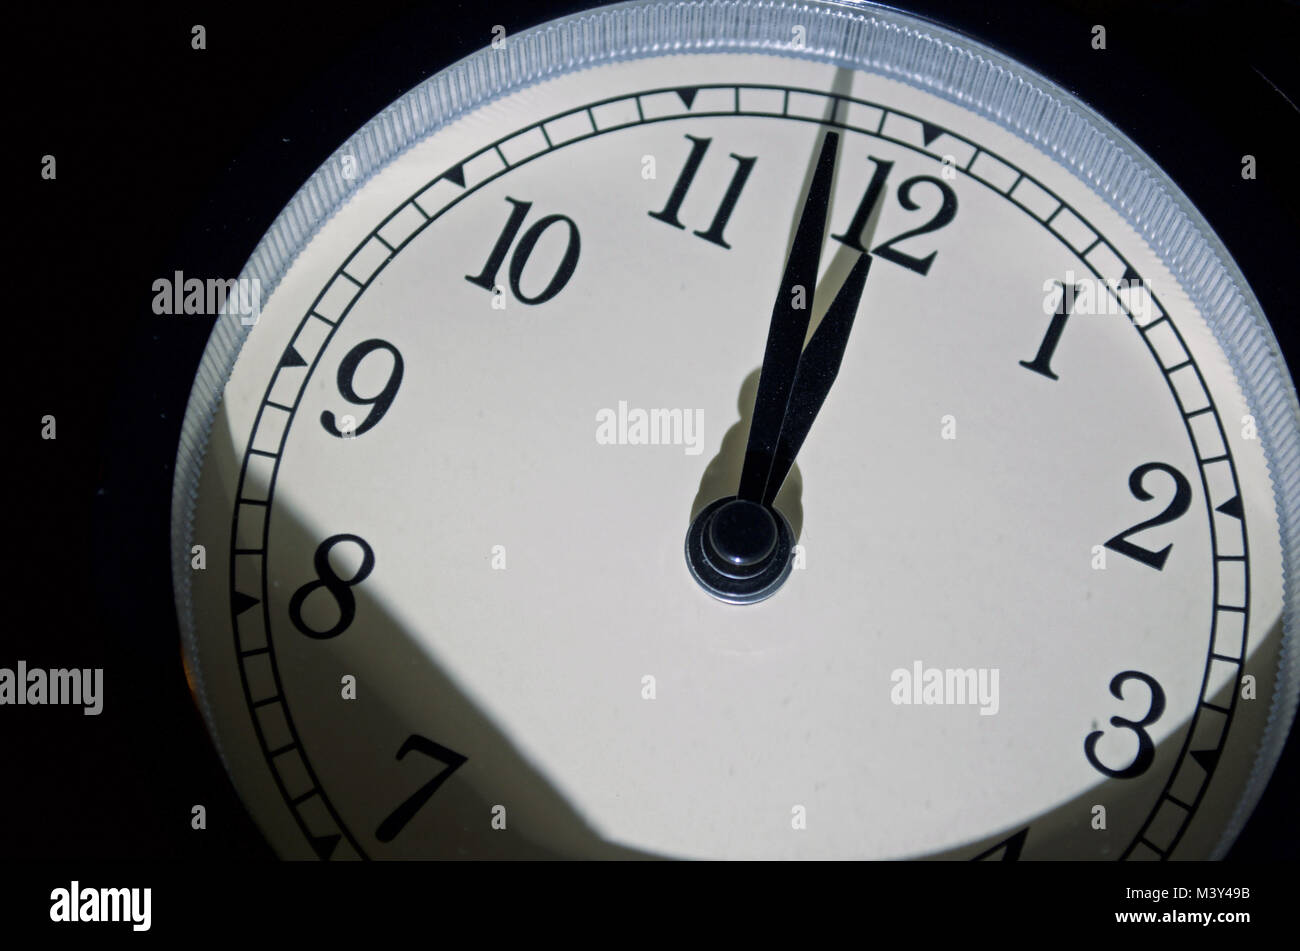 Doomsday Clock Set at Two Minutes To Midnight Stock Photo